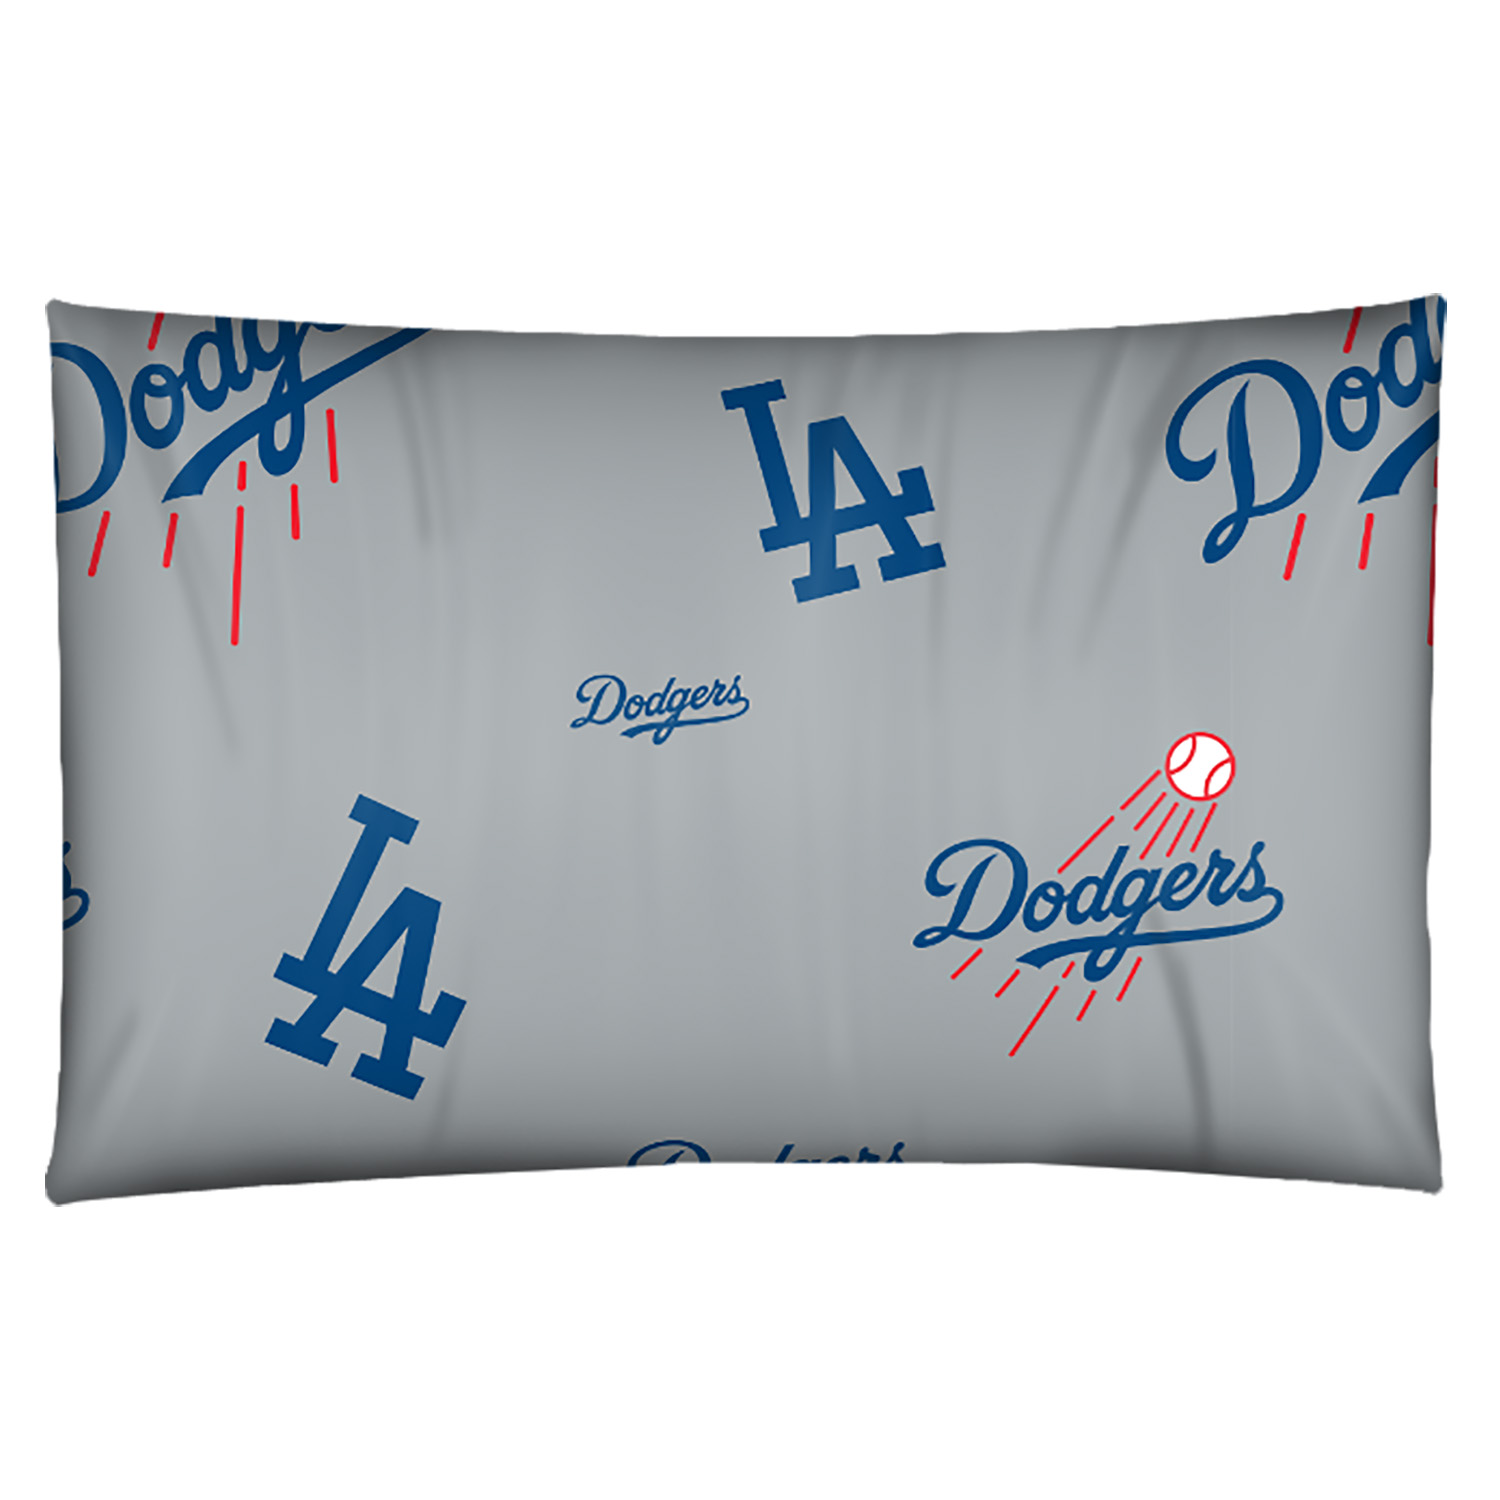 MLB Los Angeles Dodgers Bed In Bag Set, Queen Size, Team Colors, 100% Polyester, 5 Piece Set - image 4 of 4